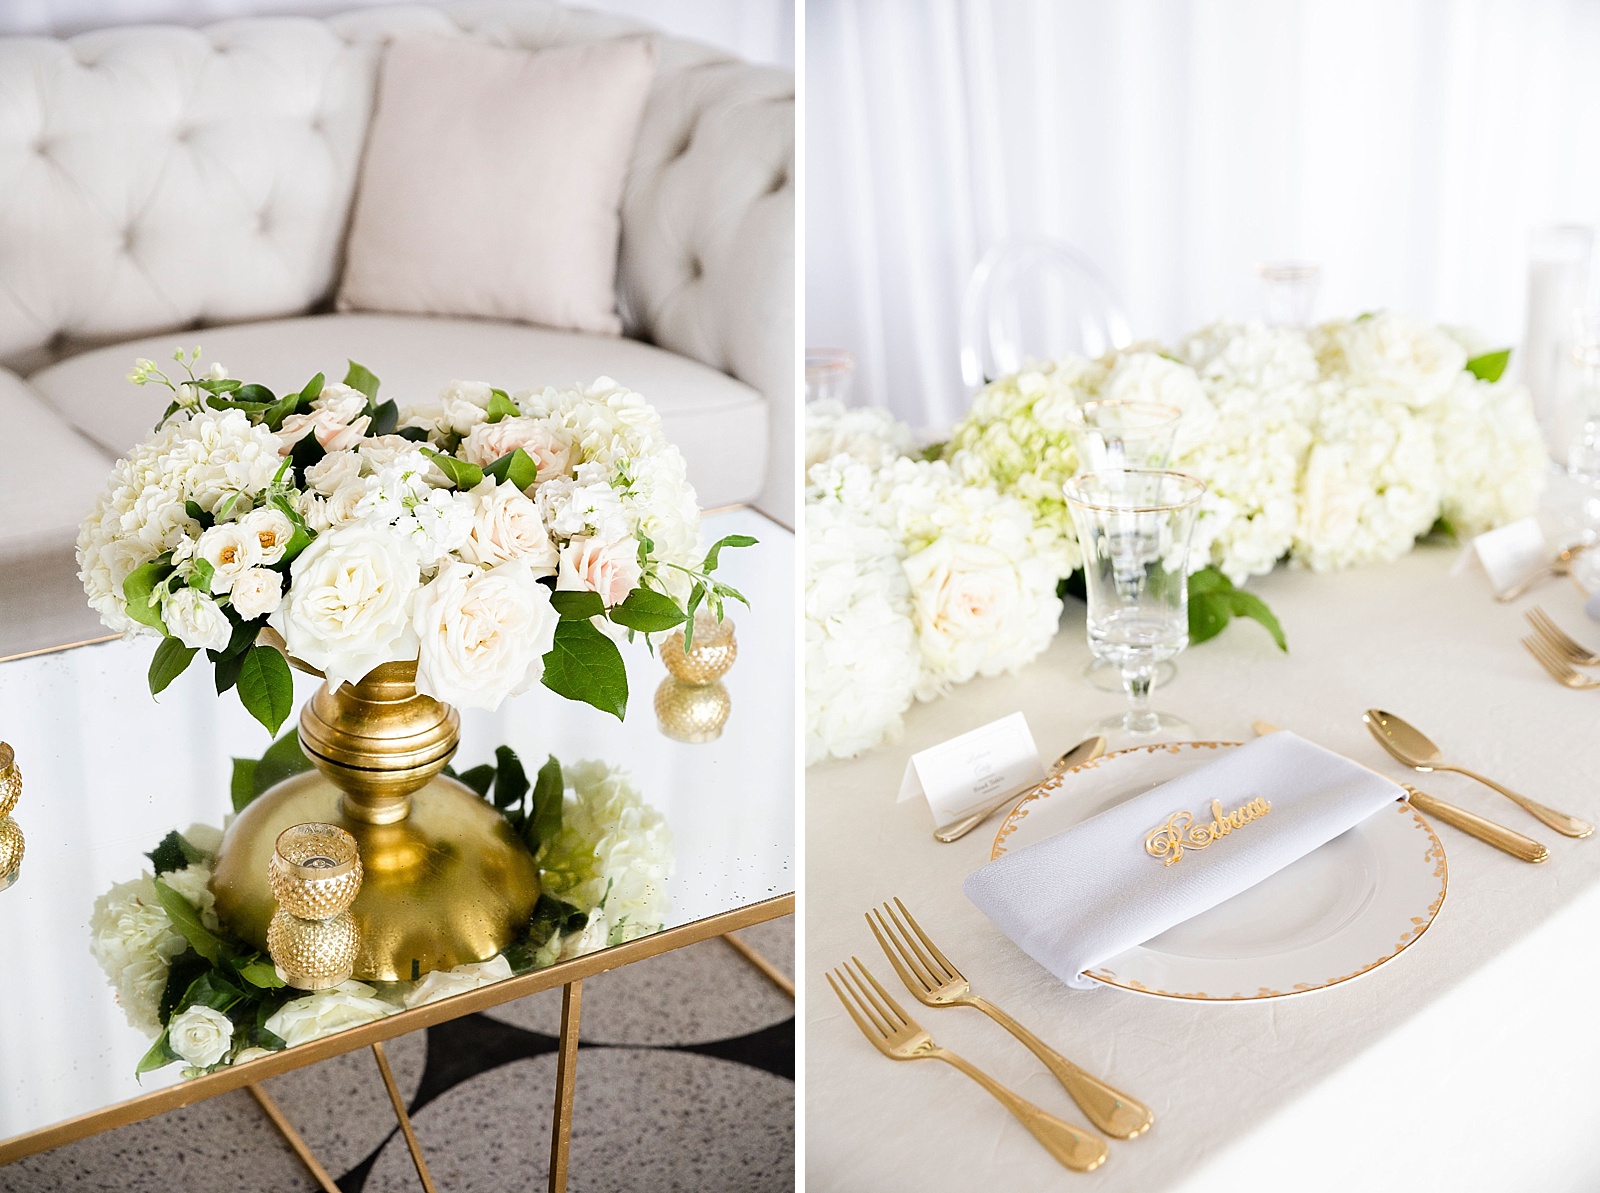 Blushington Blooms designs floral setup for Dallas wedding reception photographed by Randi Michelle Photography